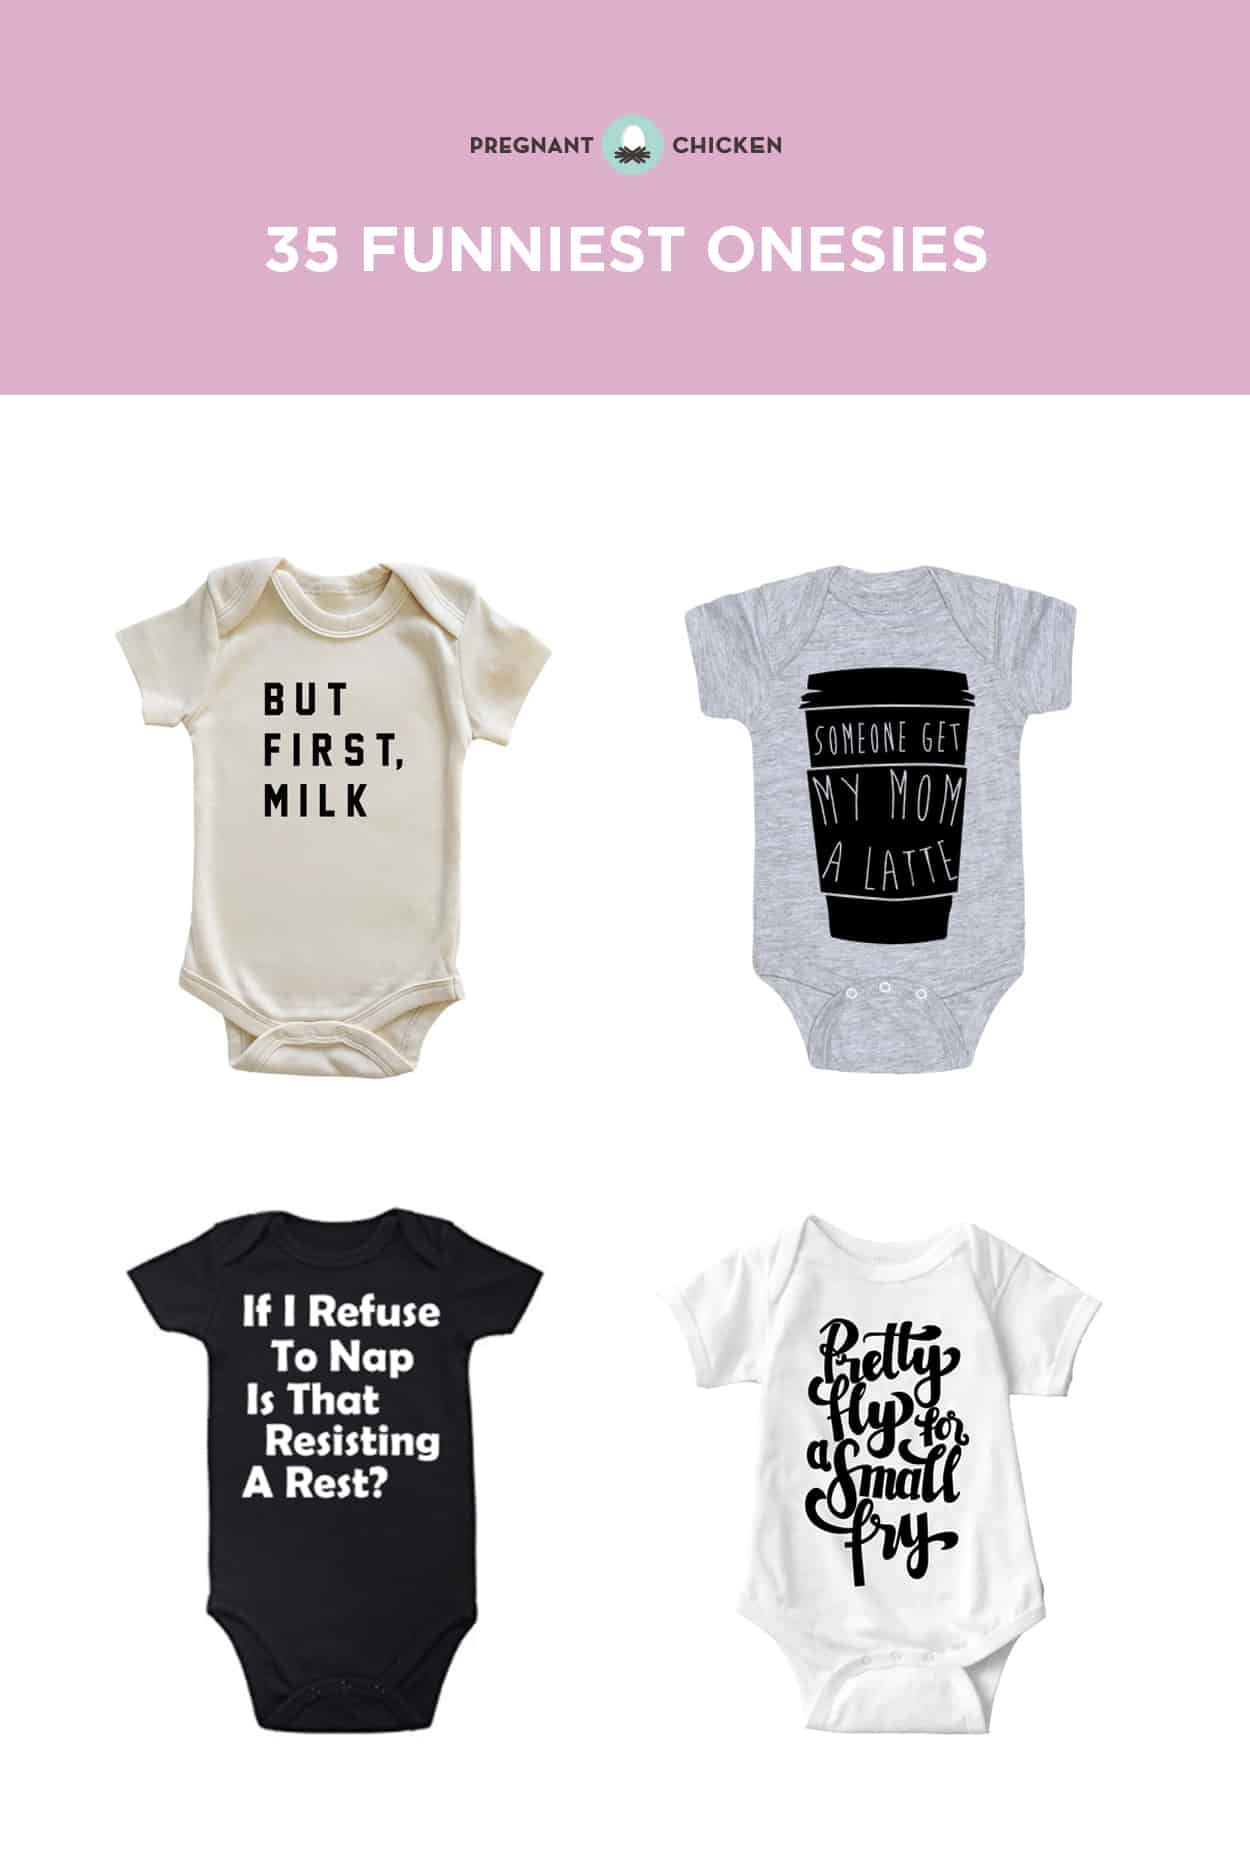 35 Funny Onesies That Tell It Like It Is - Pregnant Chicken - Free Printable Onesies